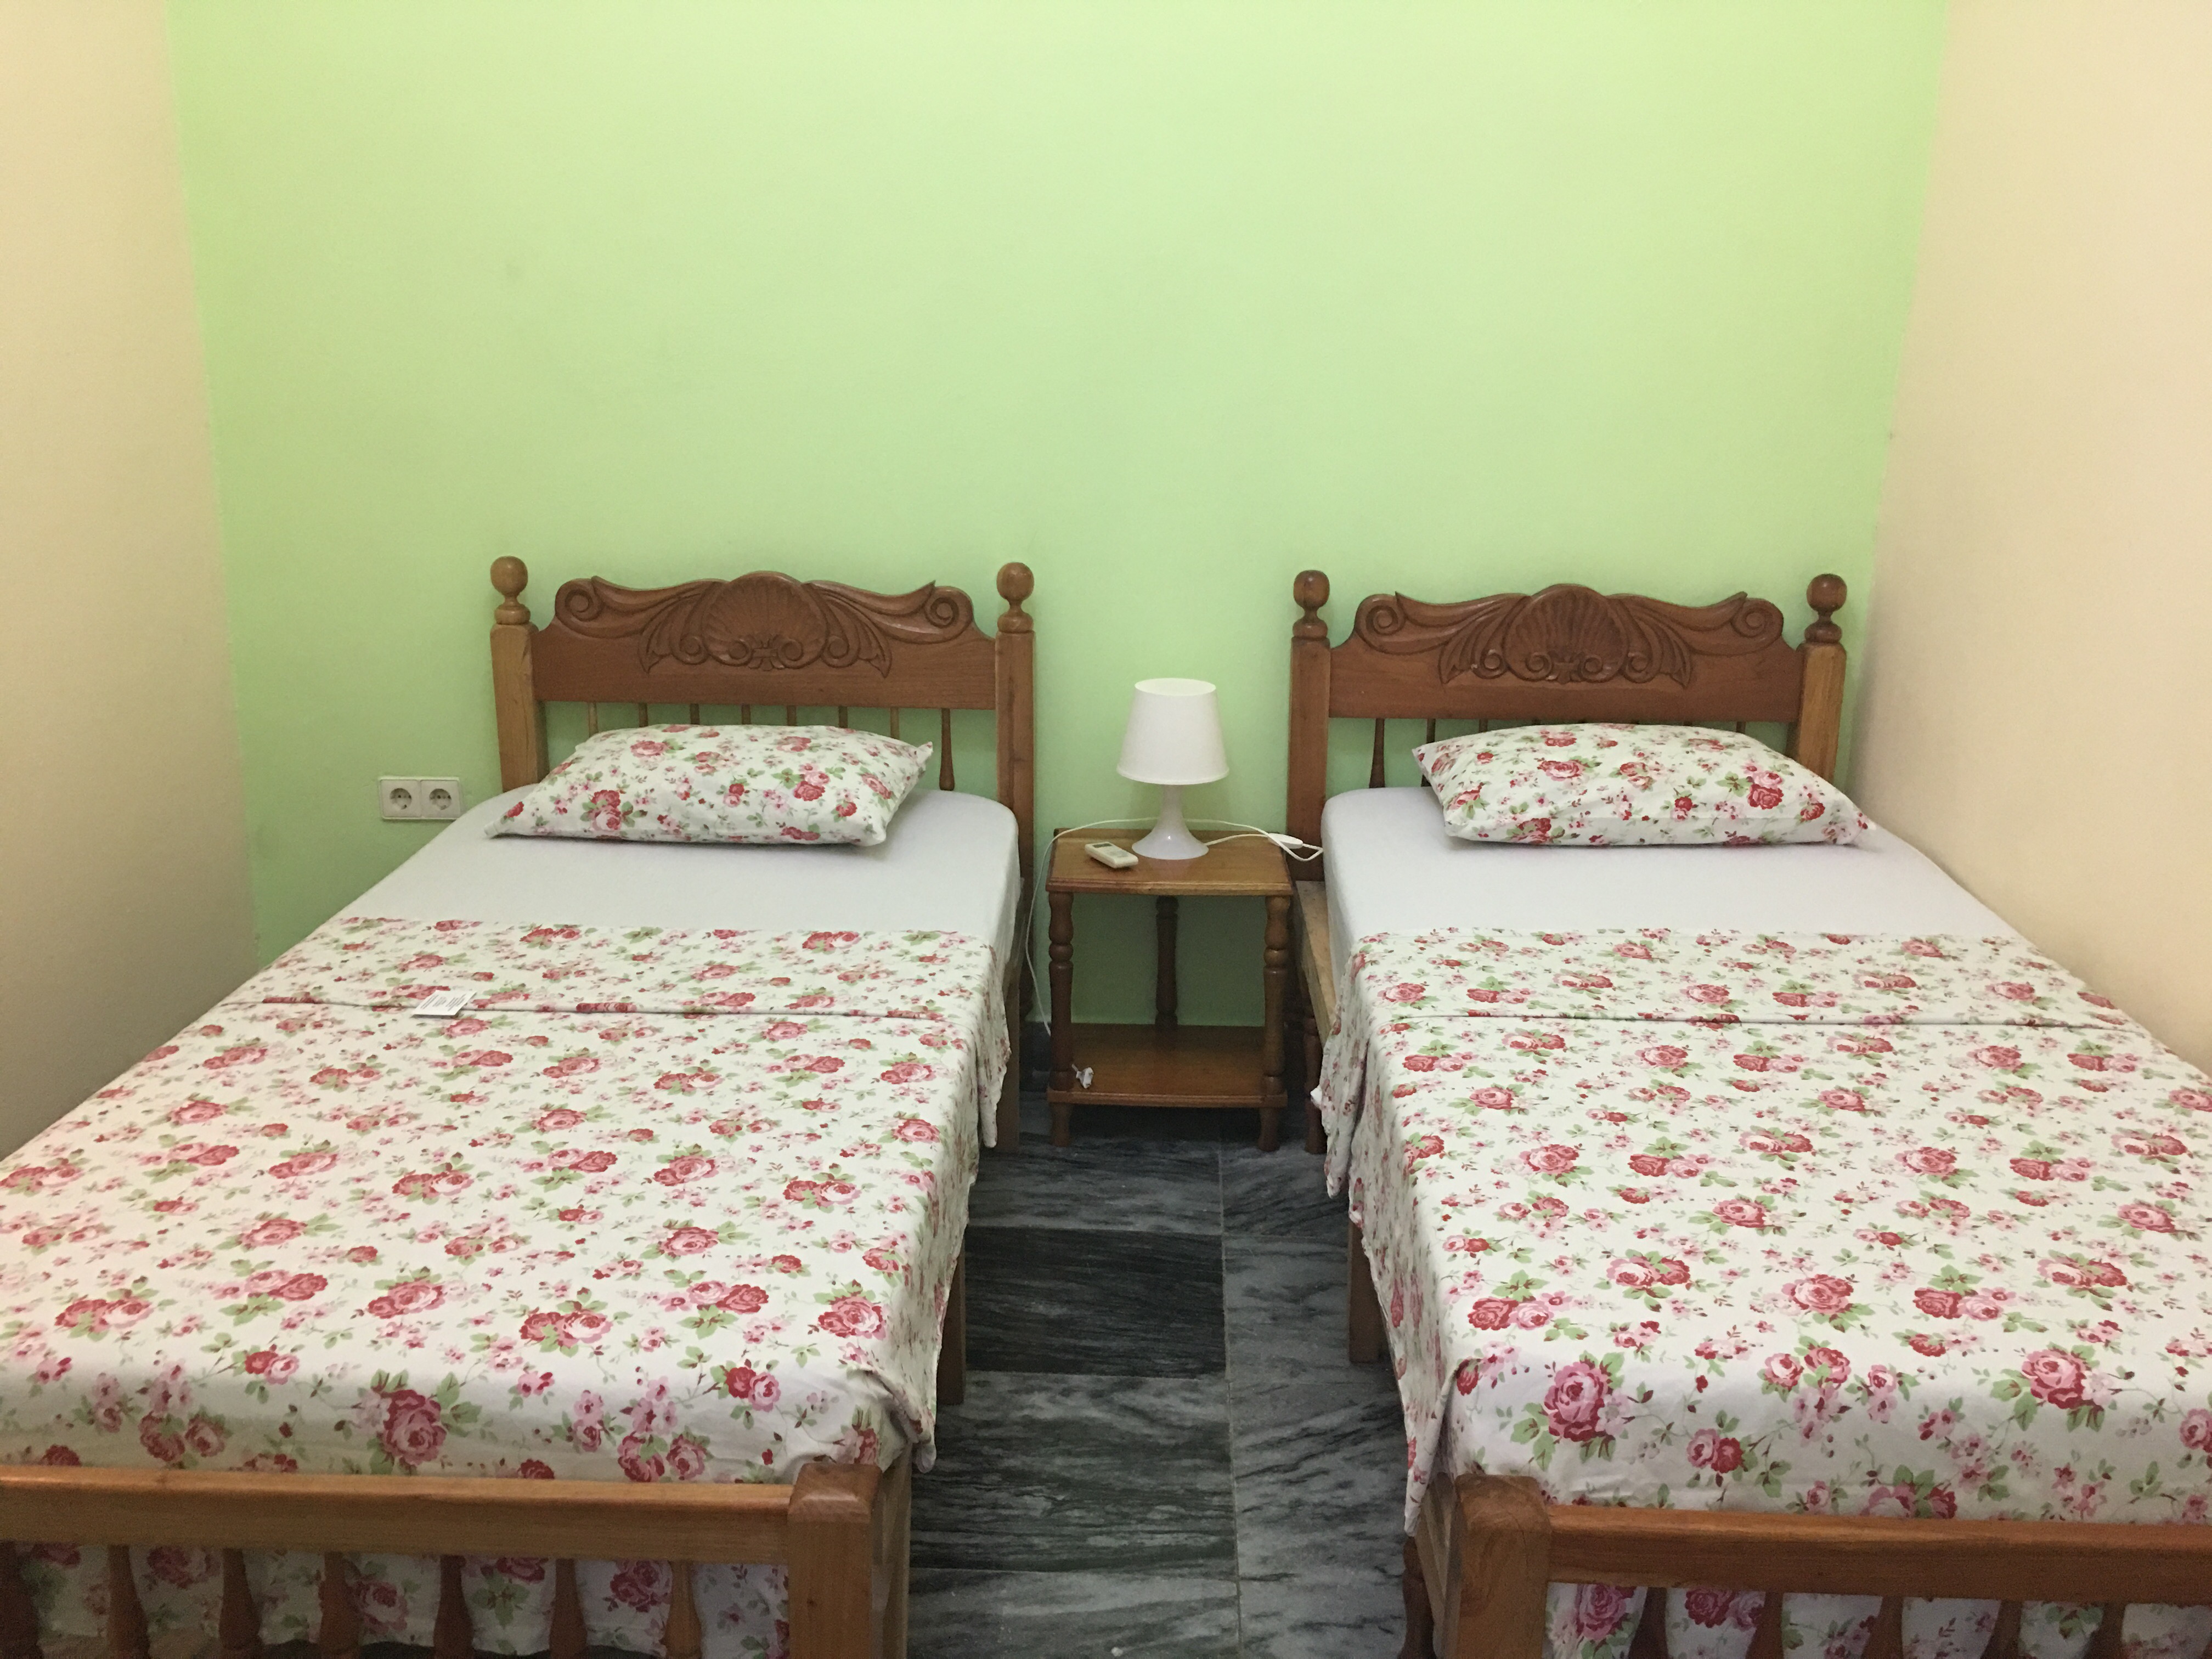 two beds with floral bedspreads and a lamp